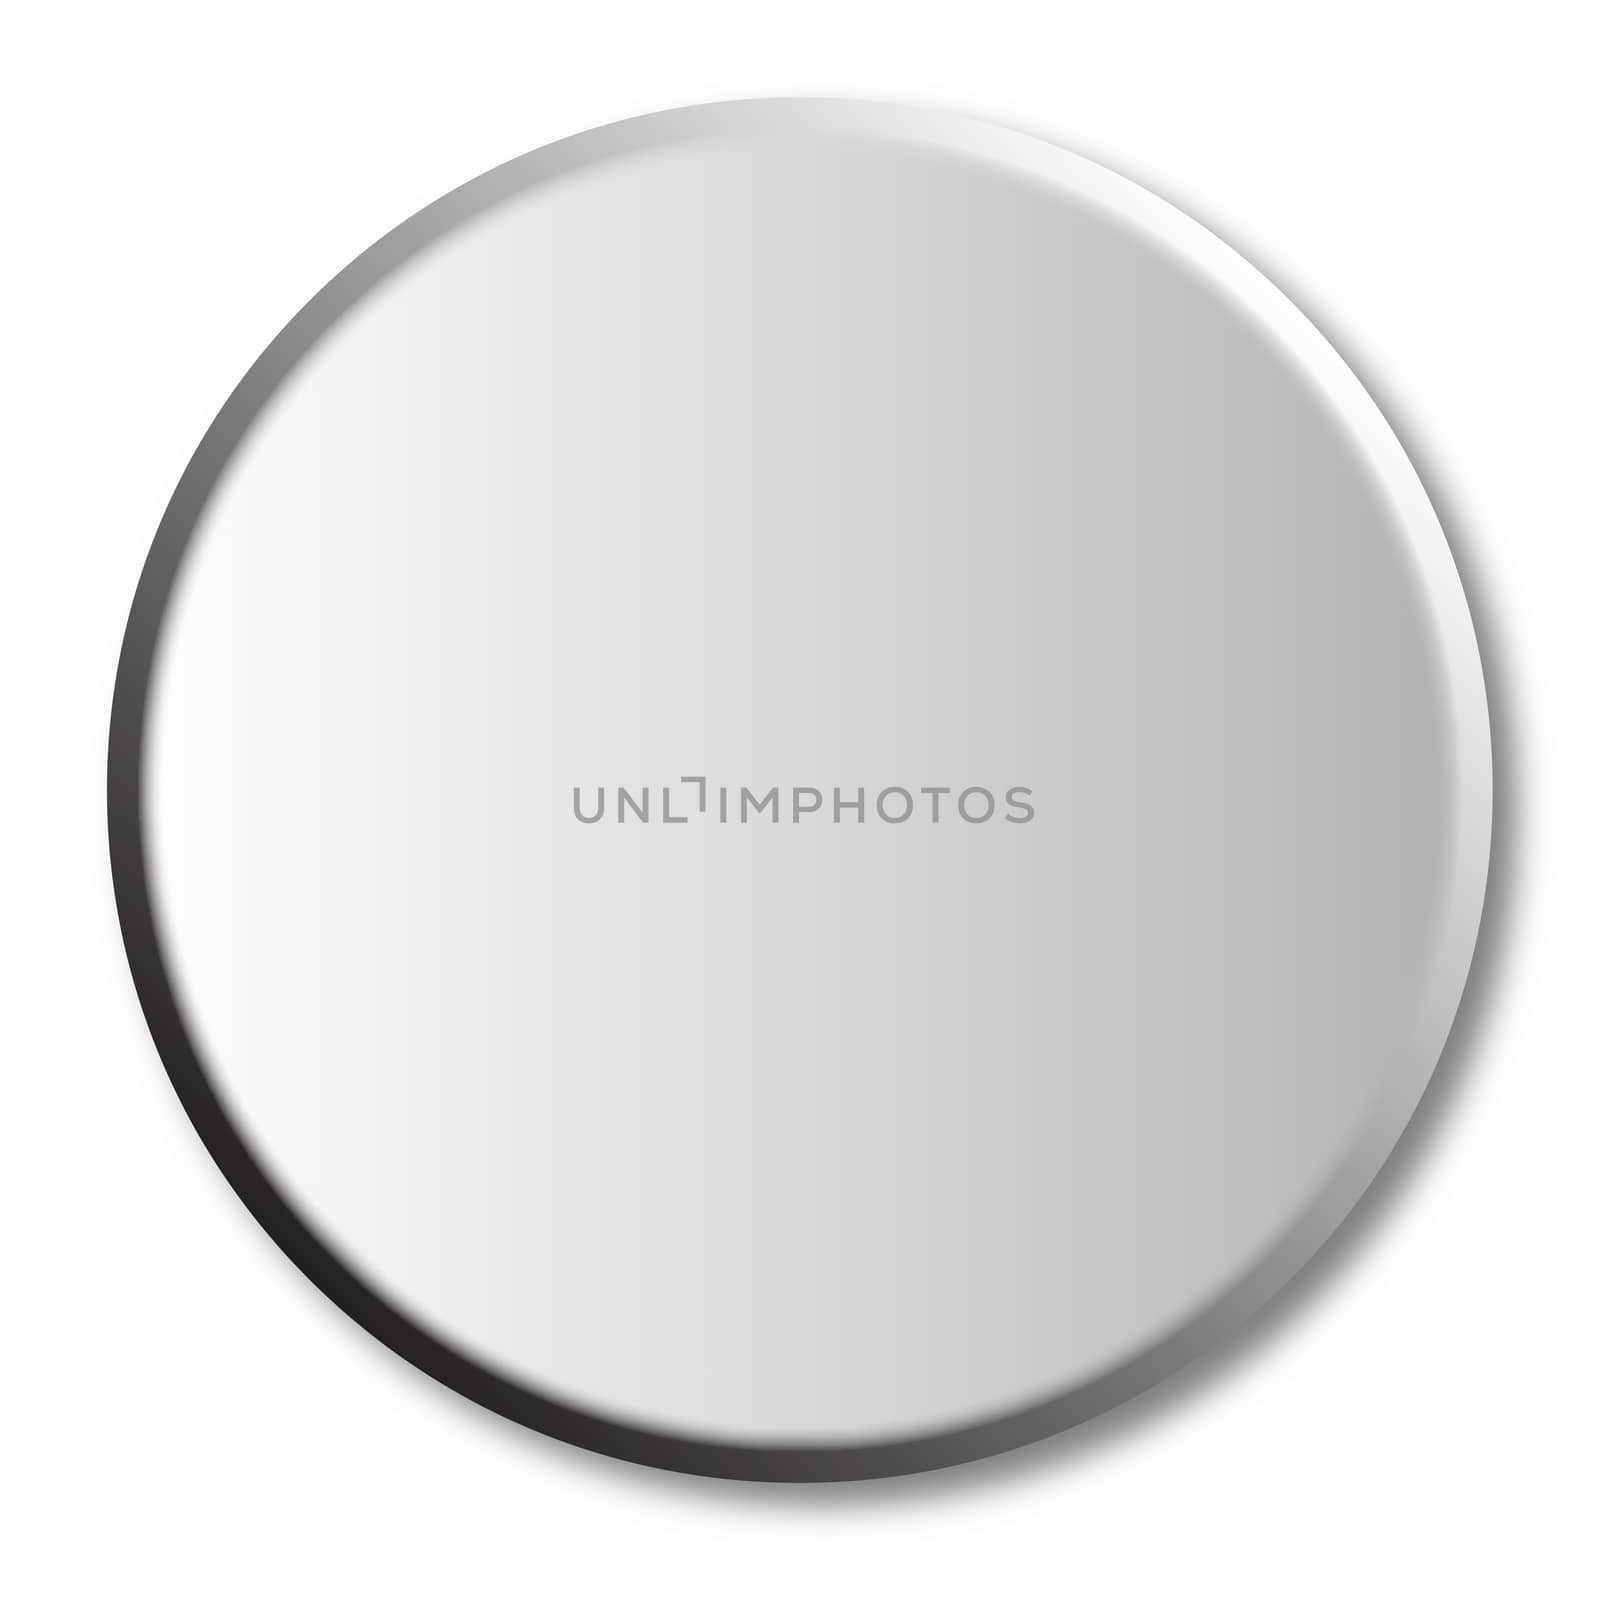 A large round button over a white background